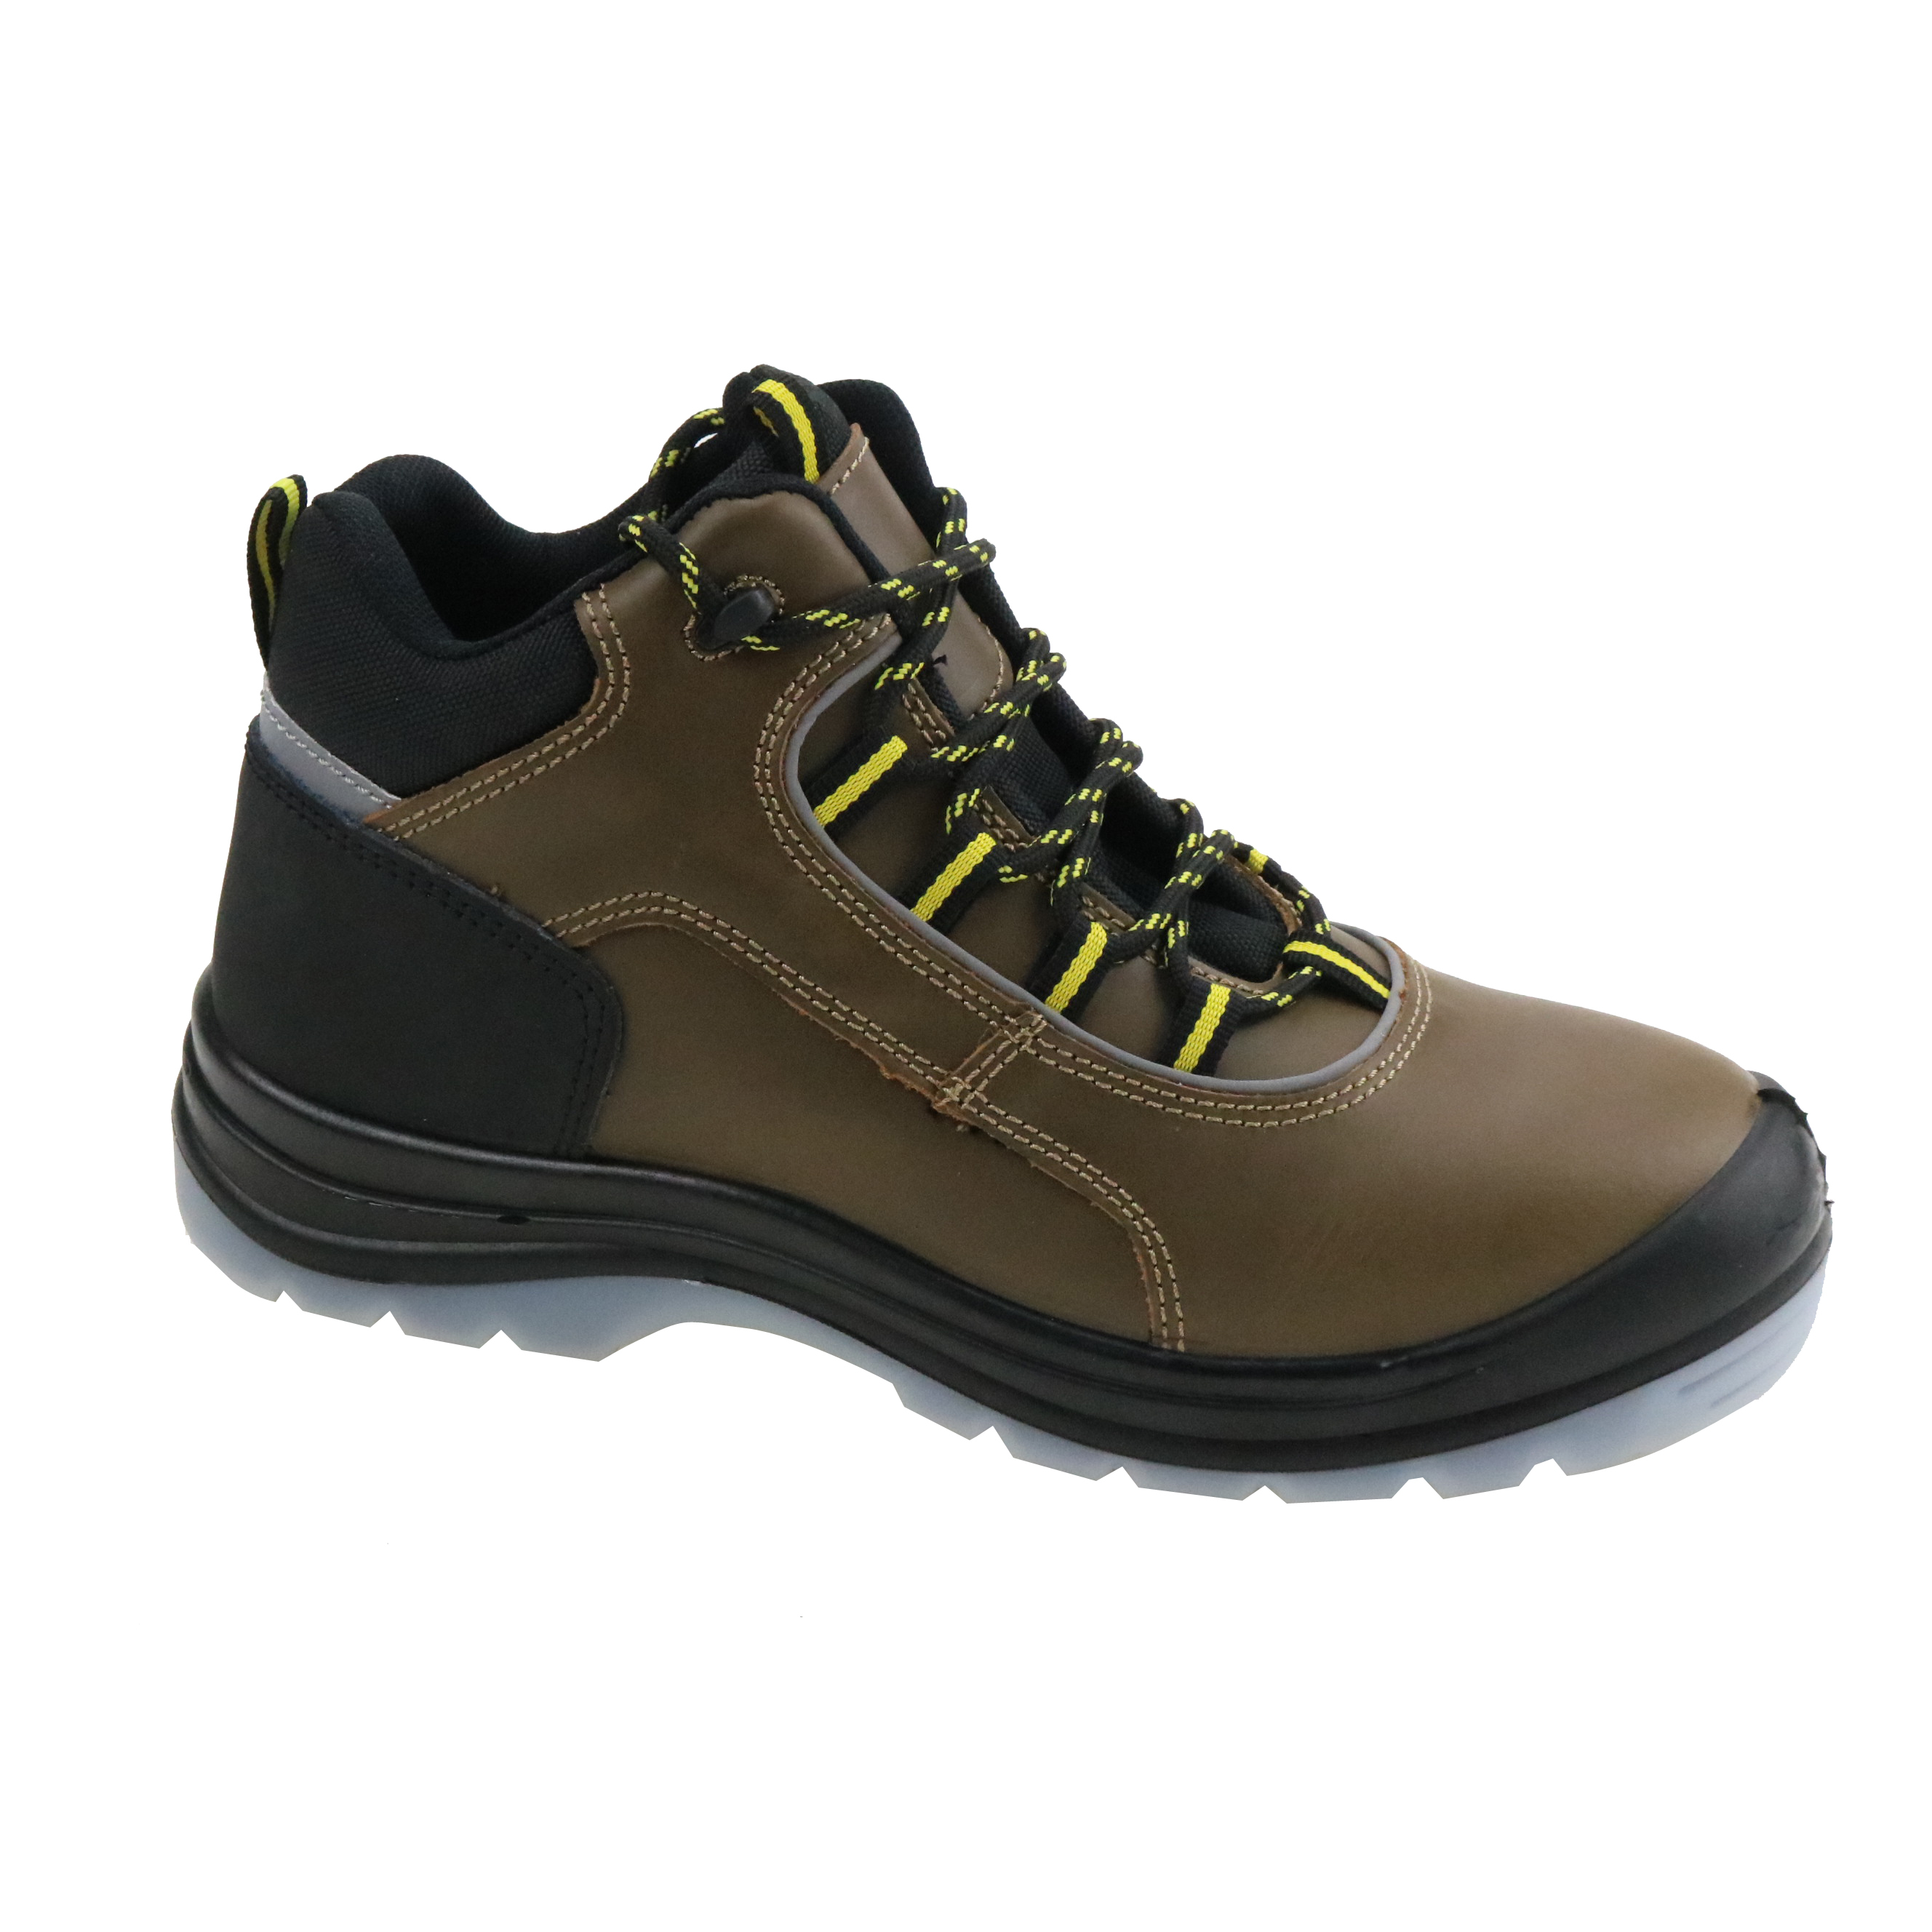 TPU sole high quality industrial work safety shoes for men composite toecap